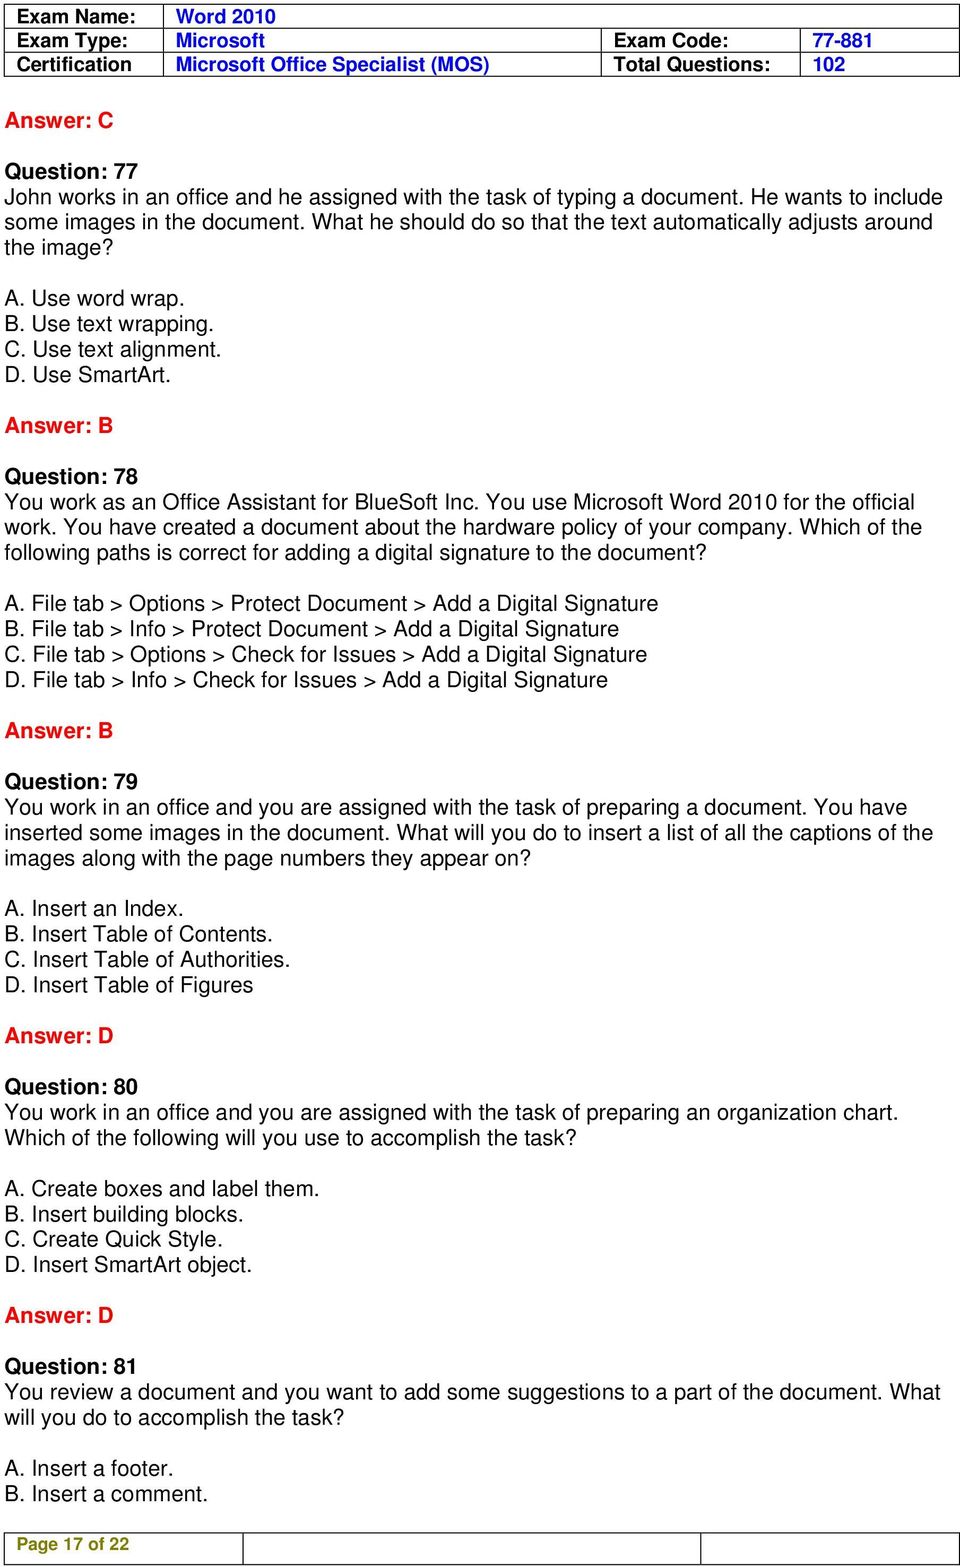 Question: 78 You work as an Office Assistant for BlueSoft Inc. You use Microsoft Word 2010 for the official work. You have created a document about the hardware policy of your company.